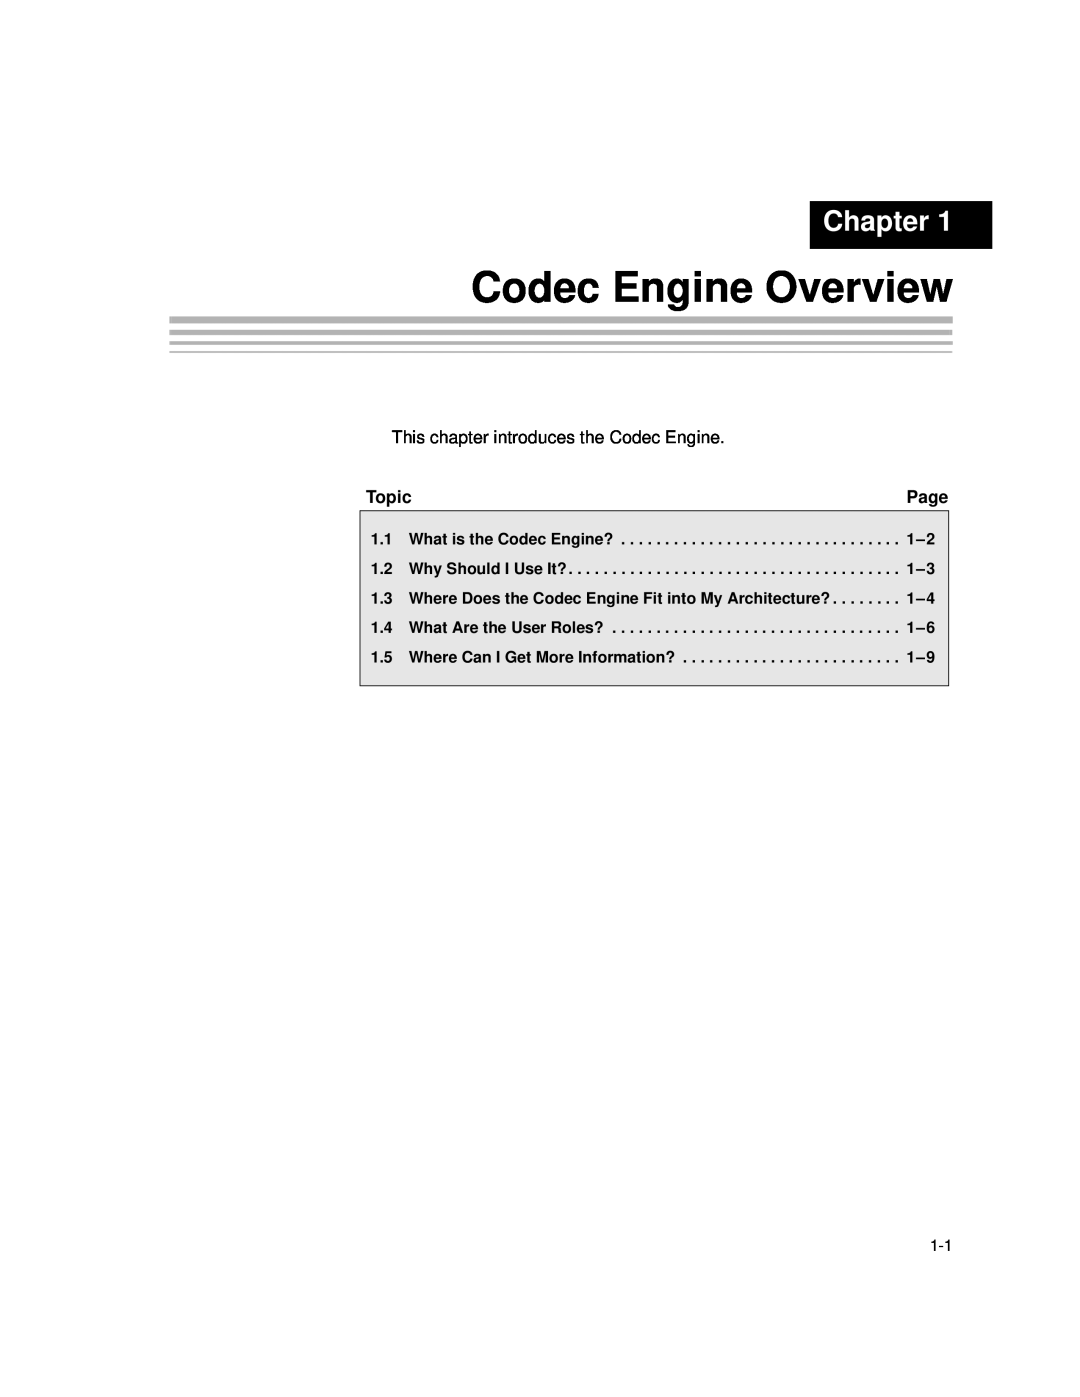 Texas Instruments Codec Engine Server manual Codec Engine Overview, Chapter 